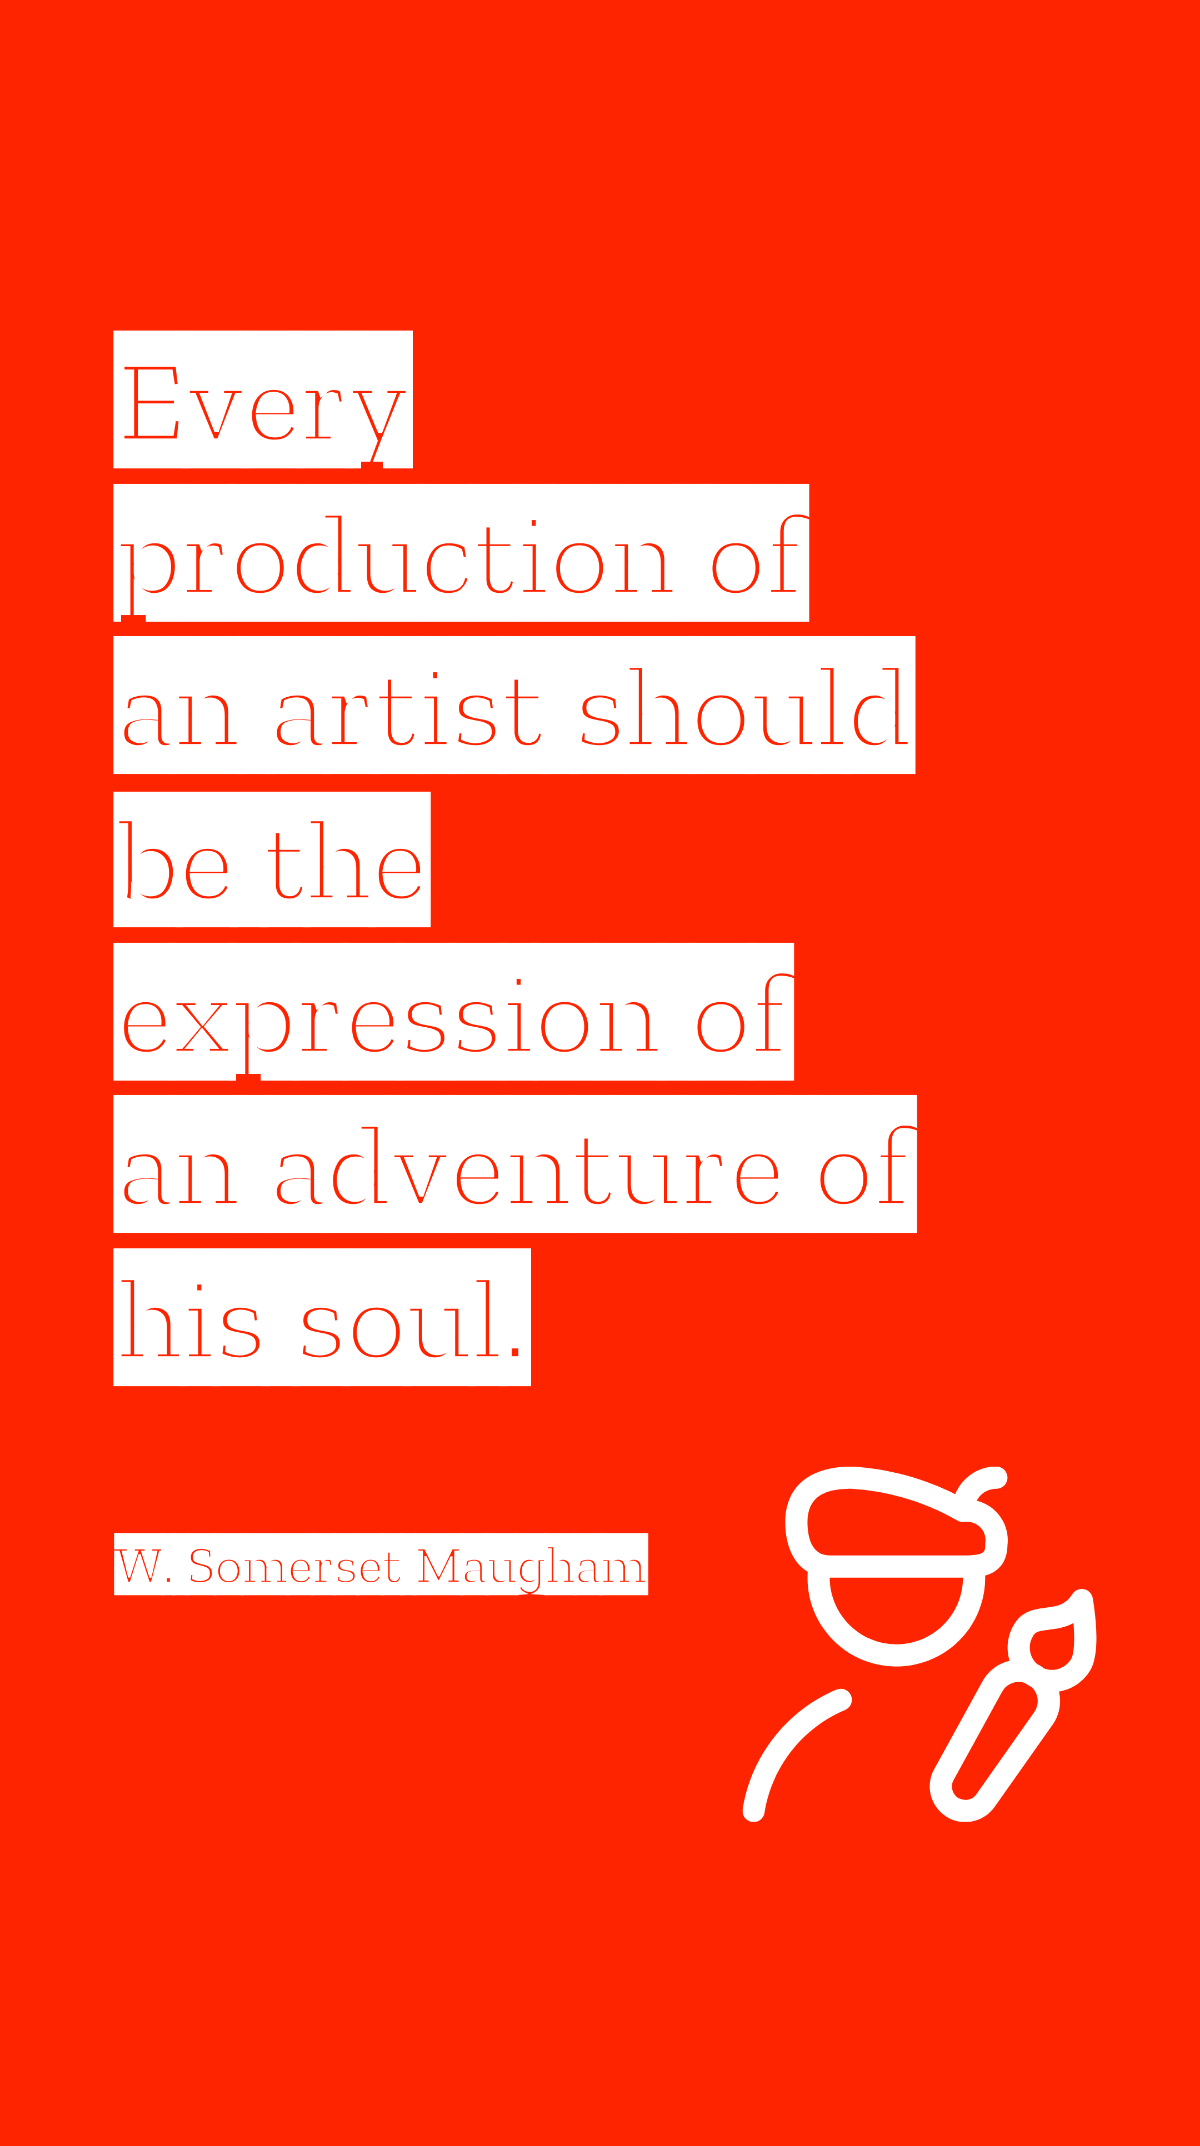 W. Somerset Maugham - Every production of an artist should be the expression of an adventure of his soul. Template